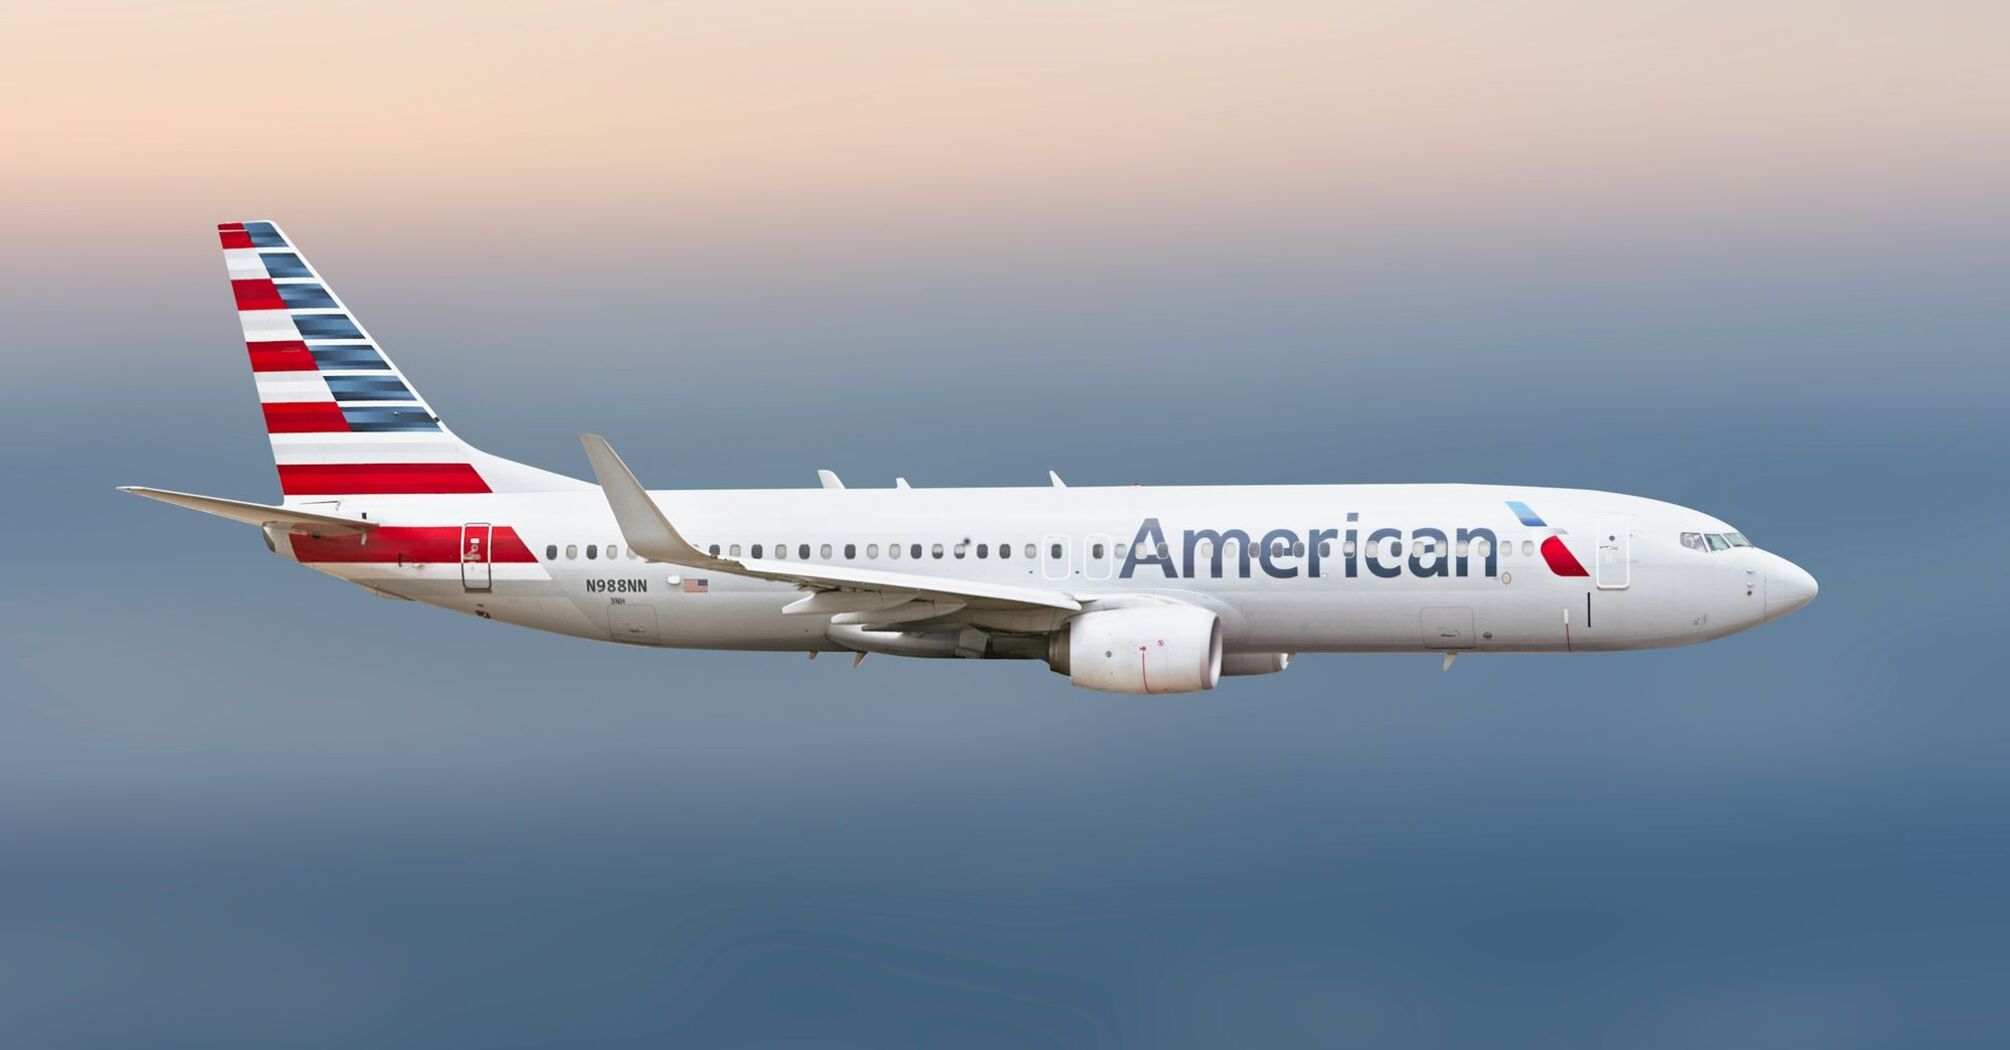 Flying American Airlines plane